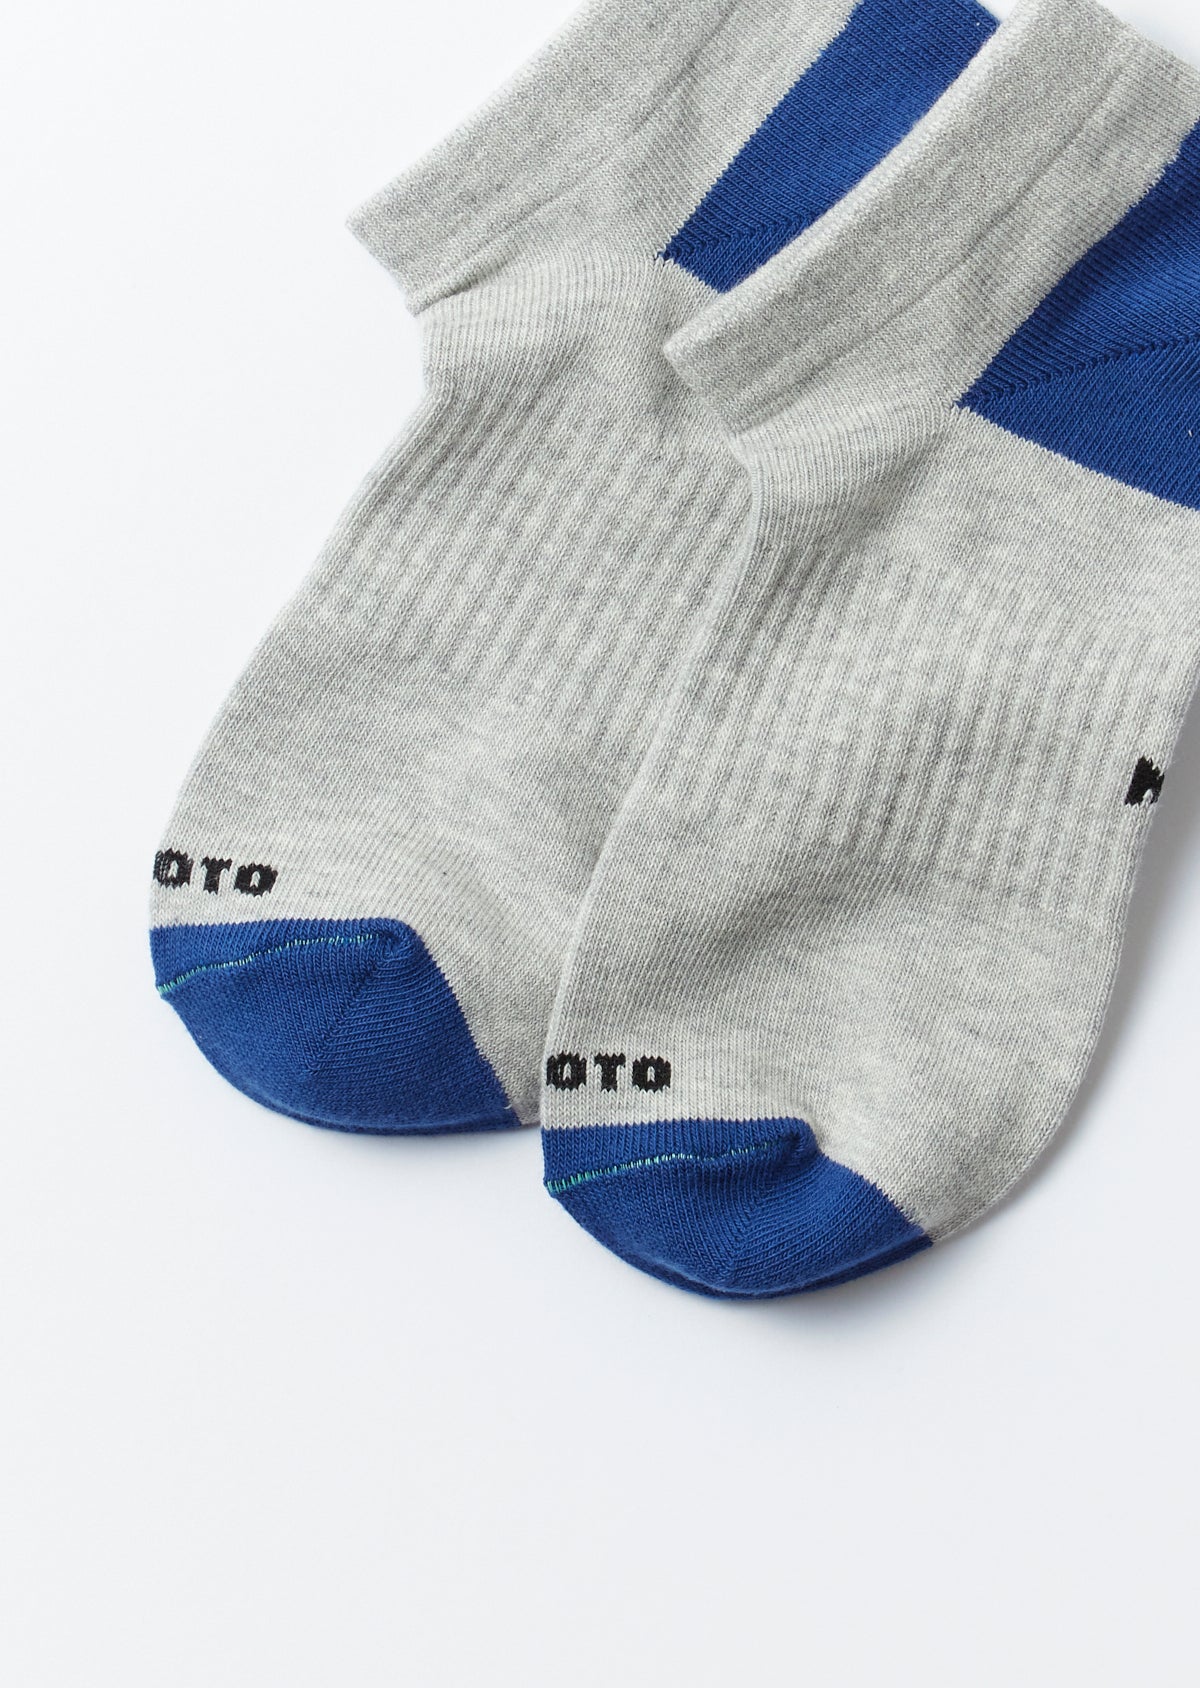 ORGANIC COTTON ＆ RECYCLE POLYESTER ANKLE SOCKS